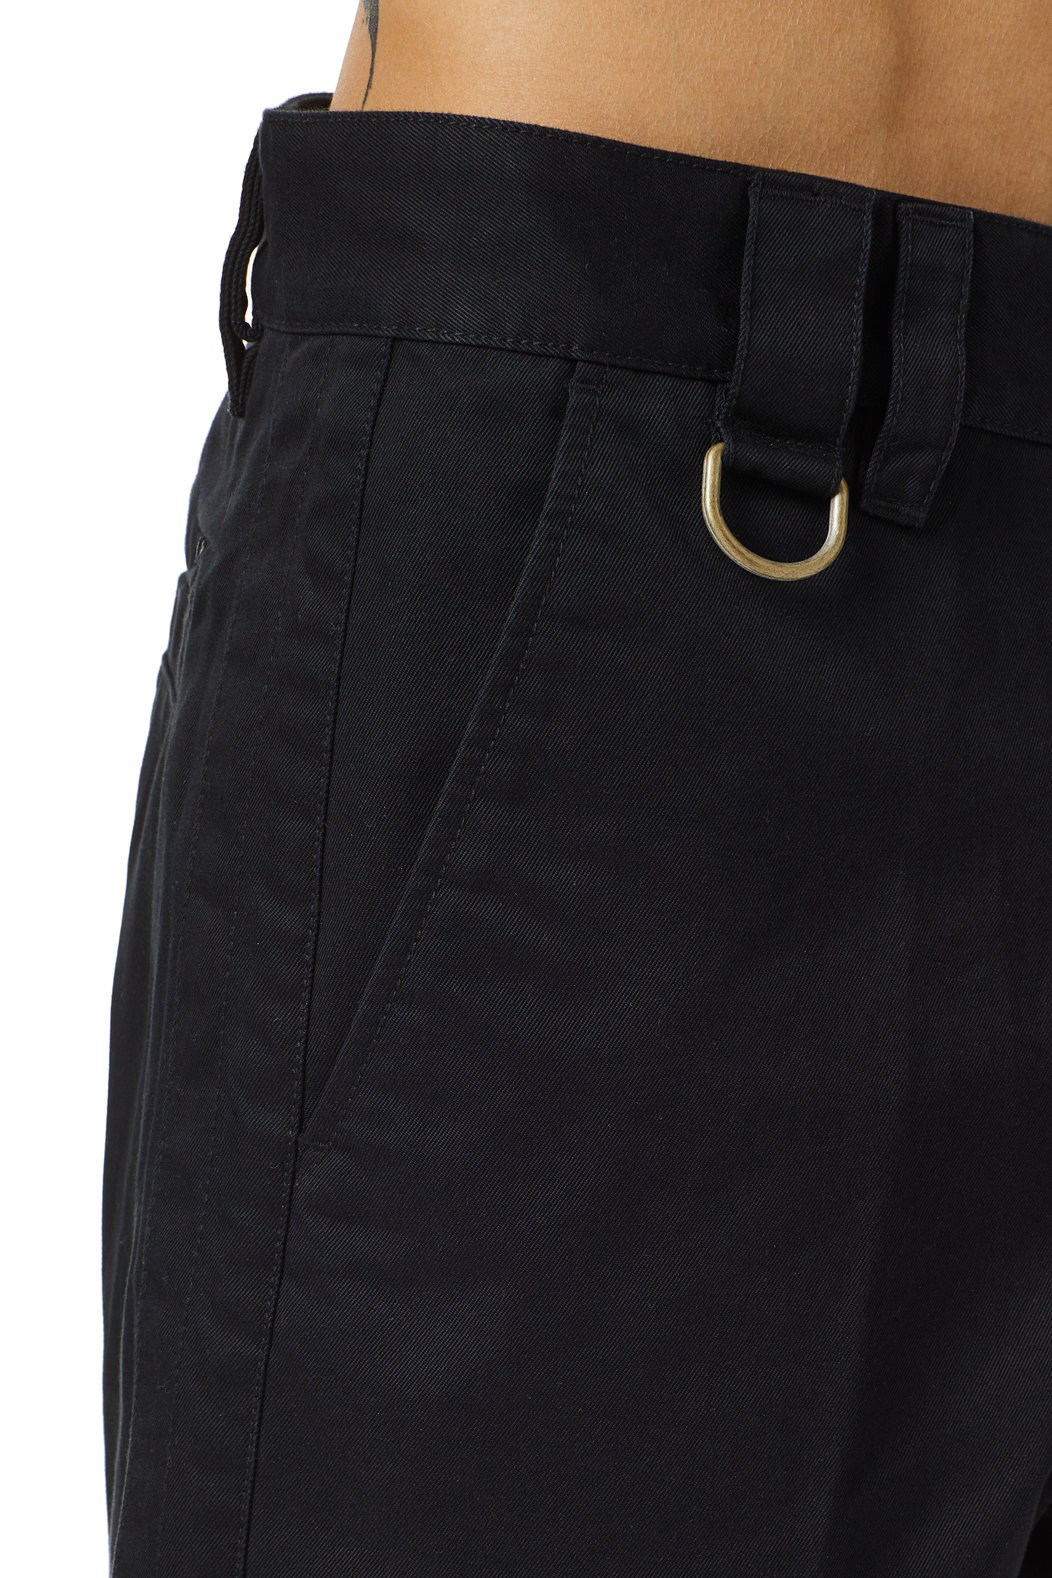 Chino pants in cotton twill